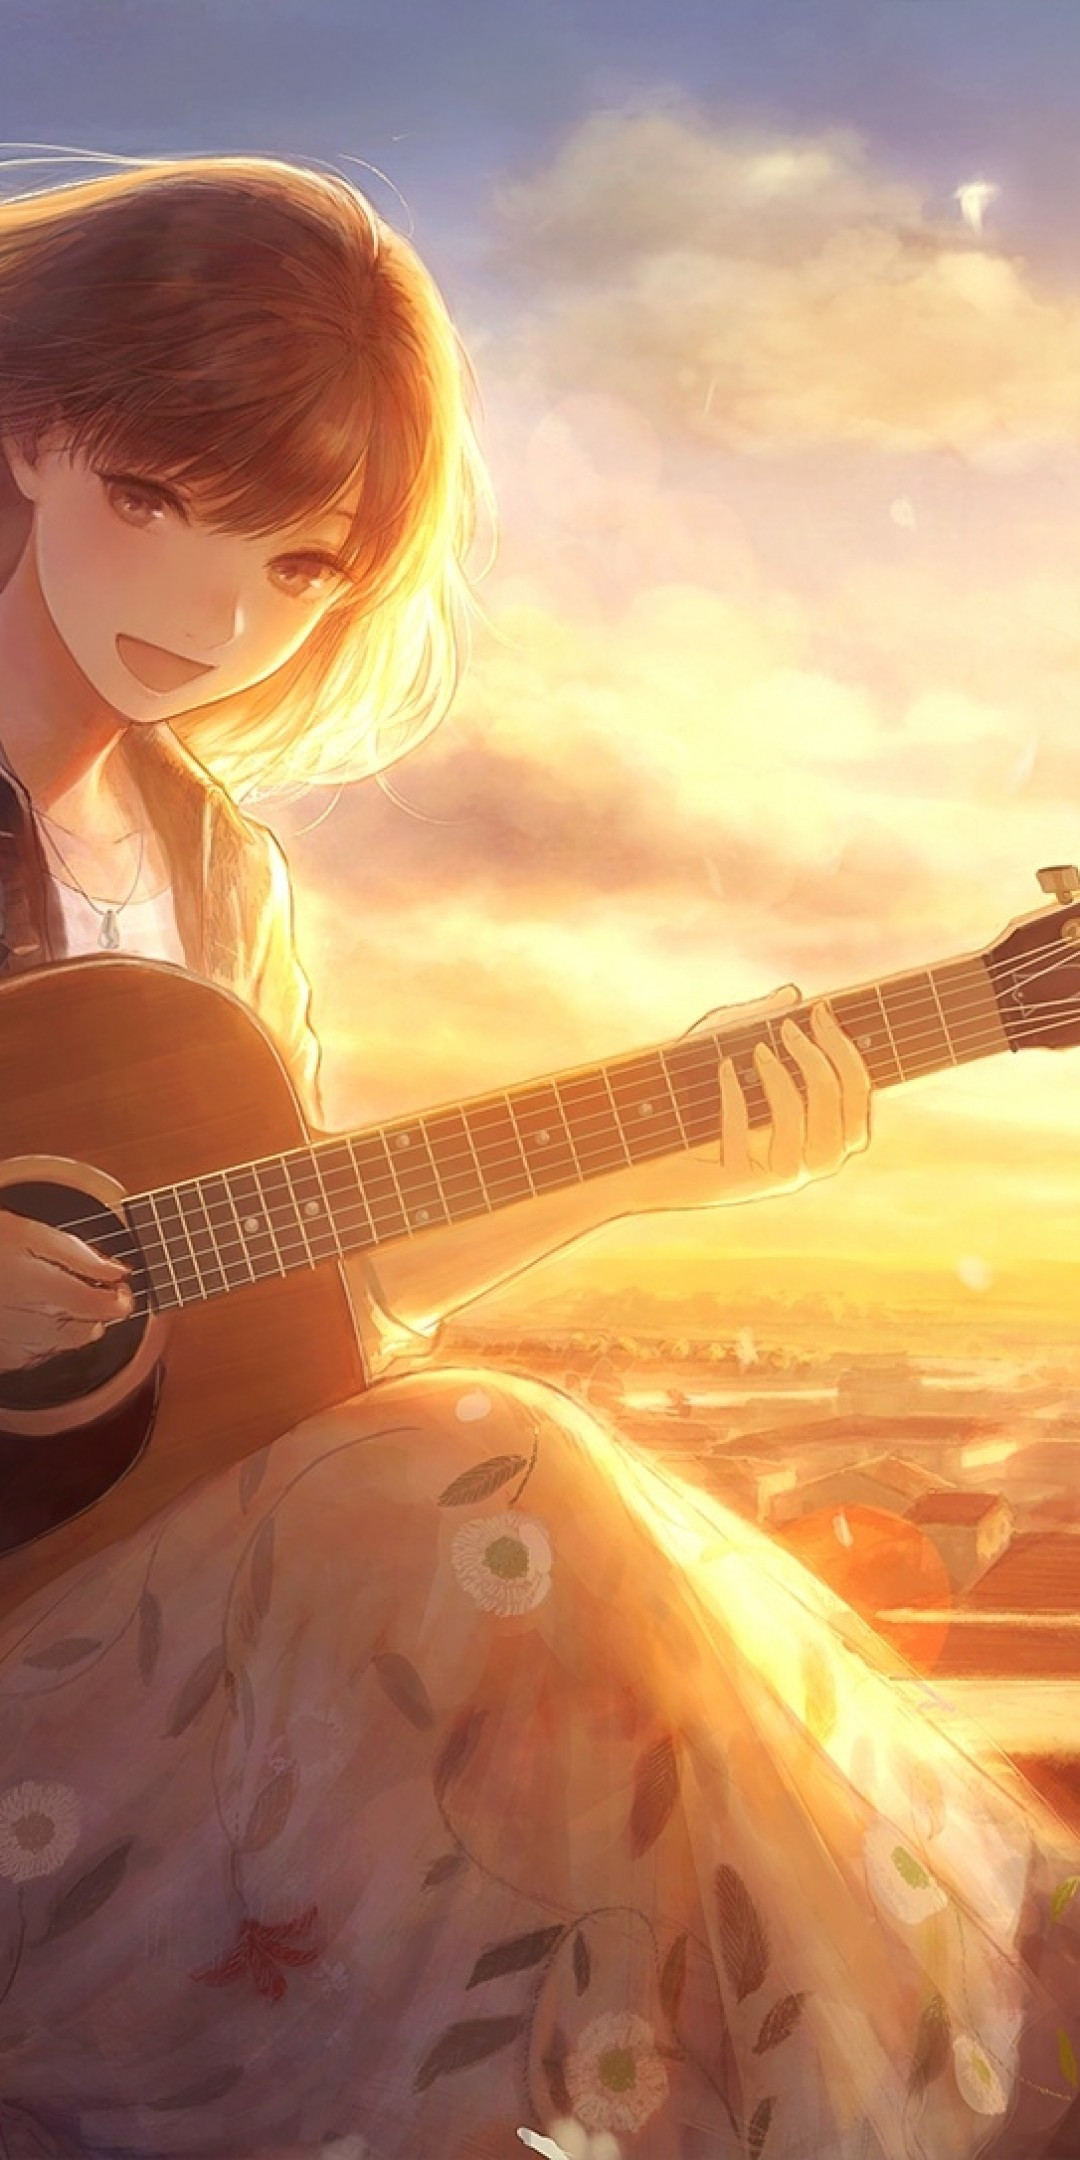 Download 1080x2160 Anime Girl, Singing, Sunlight, Guitar, Instrument, Flowers, Wind, Petals, Cat, Scenic Wallpaper for Huawei Mate 10